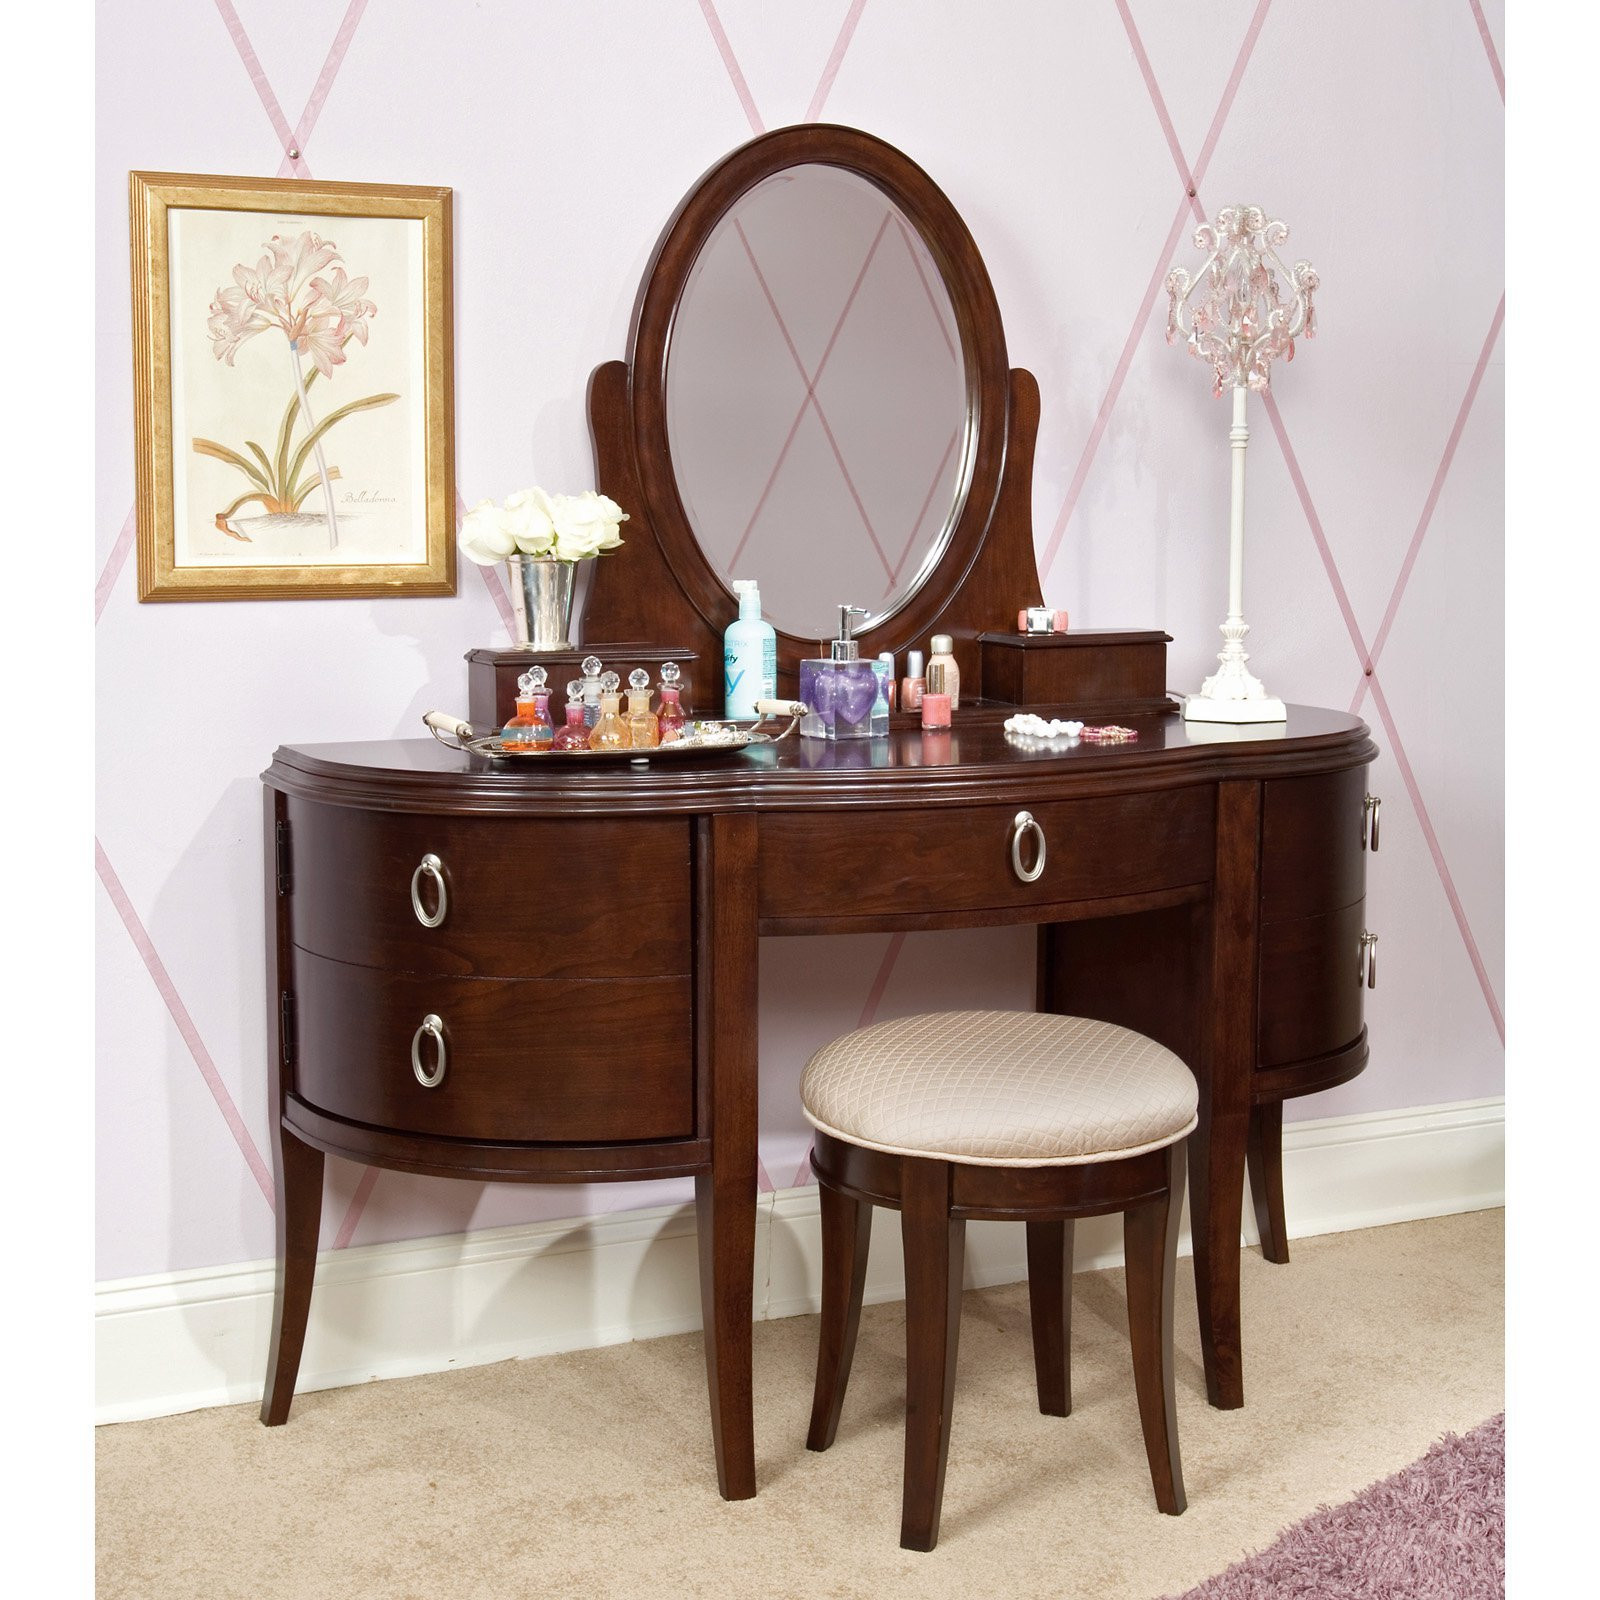 Small Bedroom Vanity
 Bedroom Antique Small Bedroom Vanity Table With Drawers